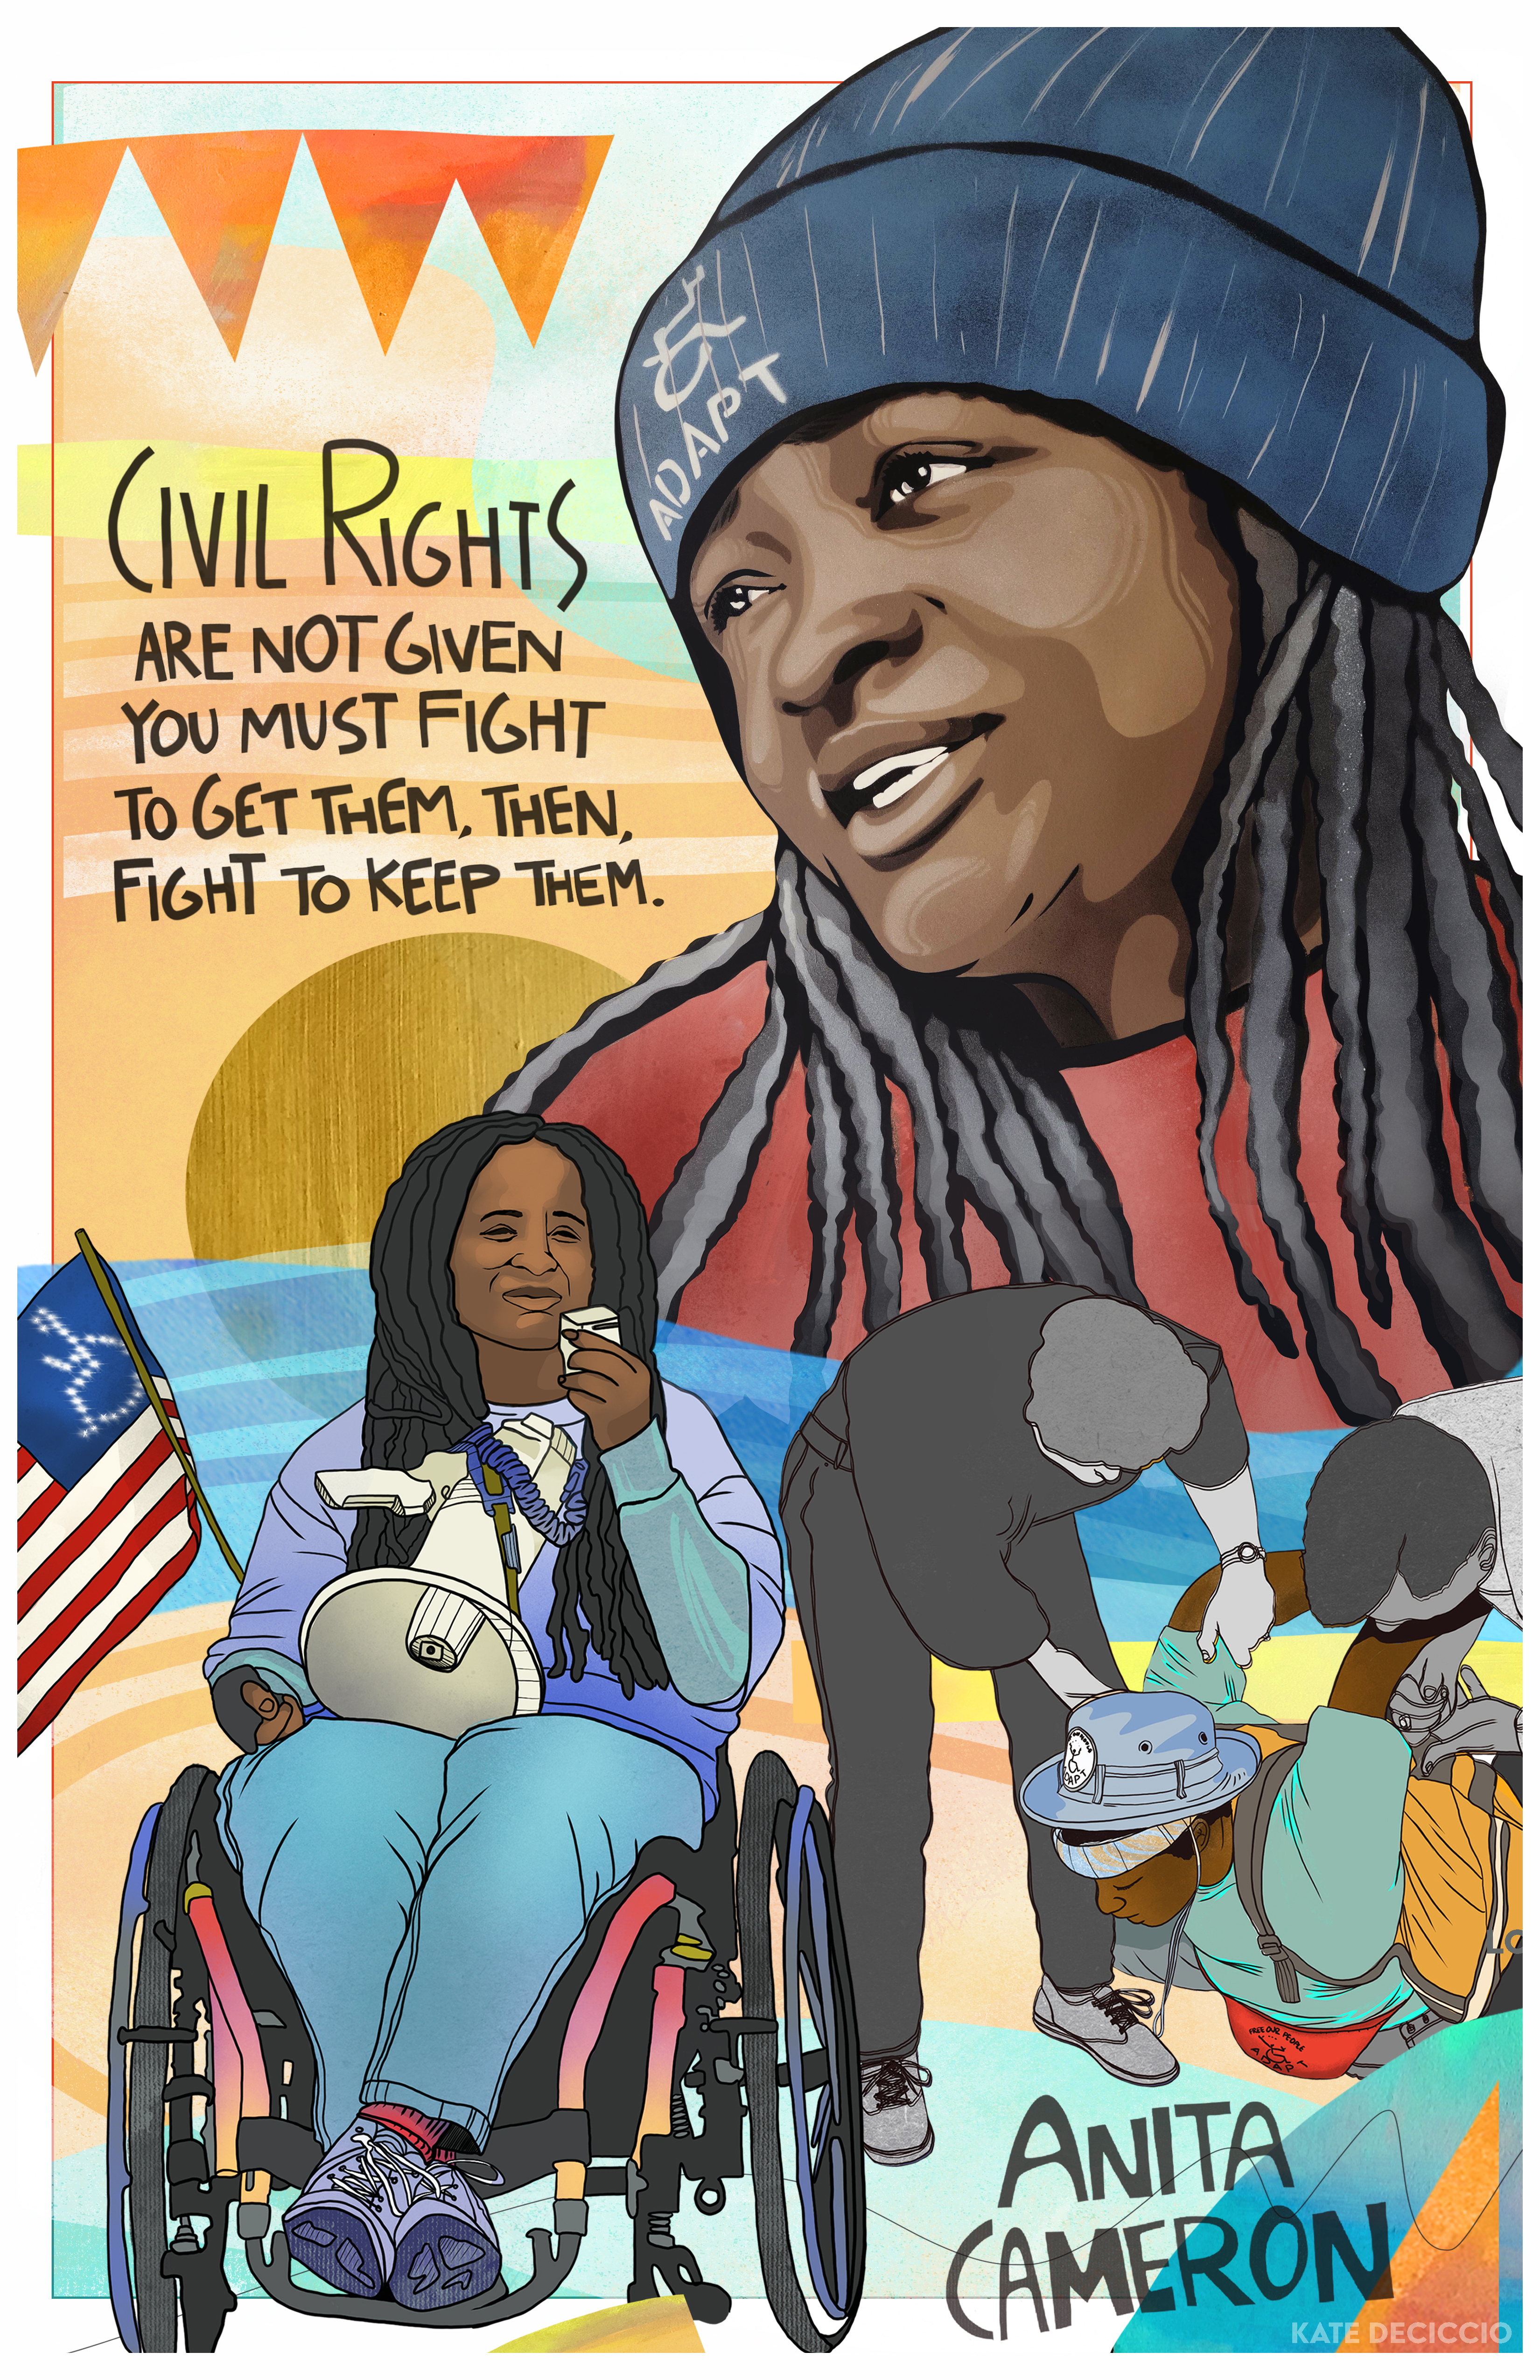 Colorful illustrative poster of Anita Cameron, a black woman sitting in a wheelchair holding an American flag with the words Civil Rights are not given.  You have to fight to get them and then fight to keep them.